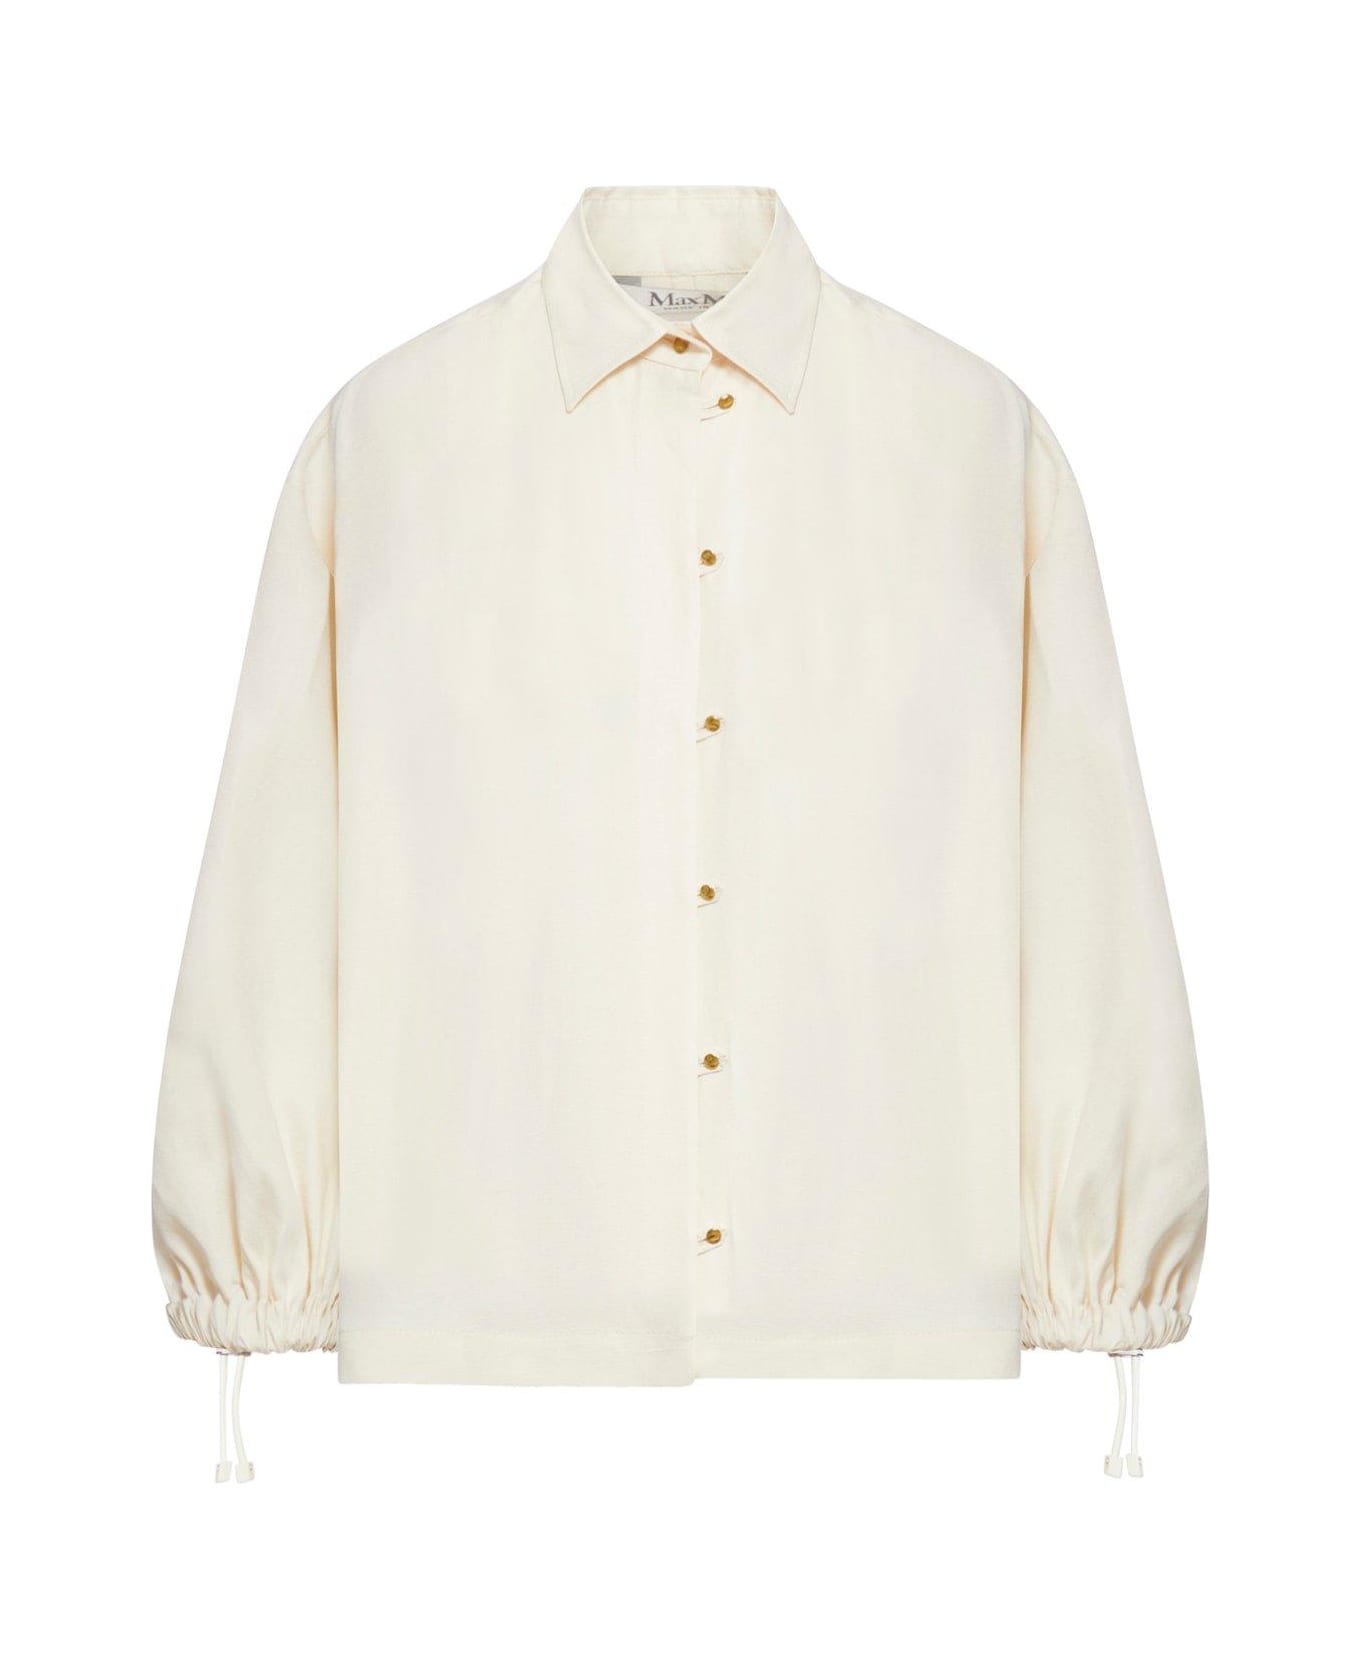 Max Mara Buttoned Long-sleeved Top - White Ivory